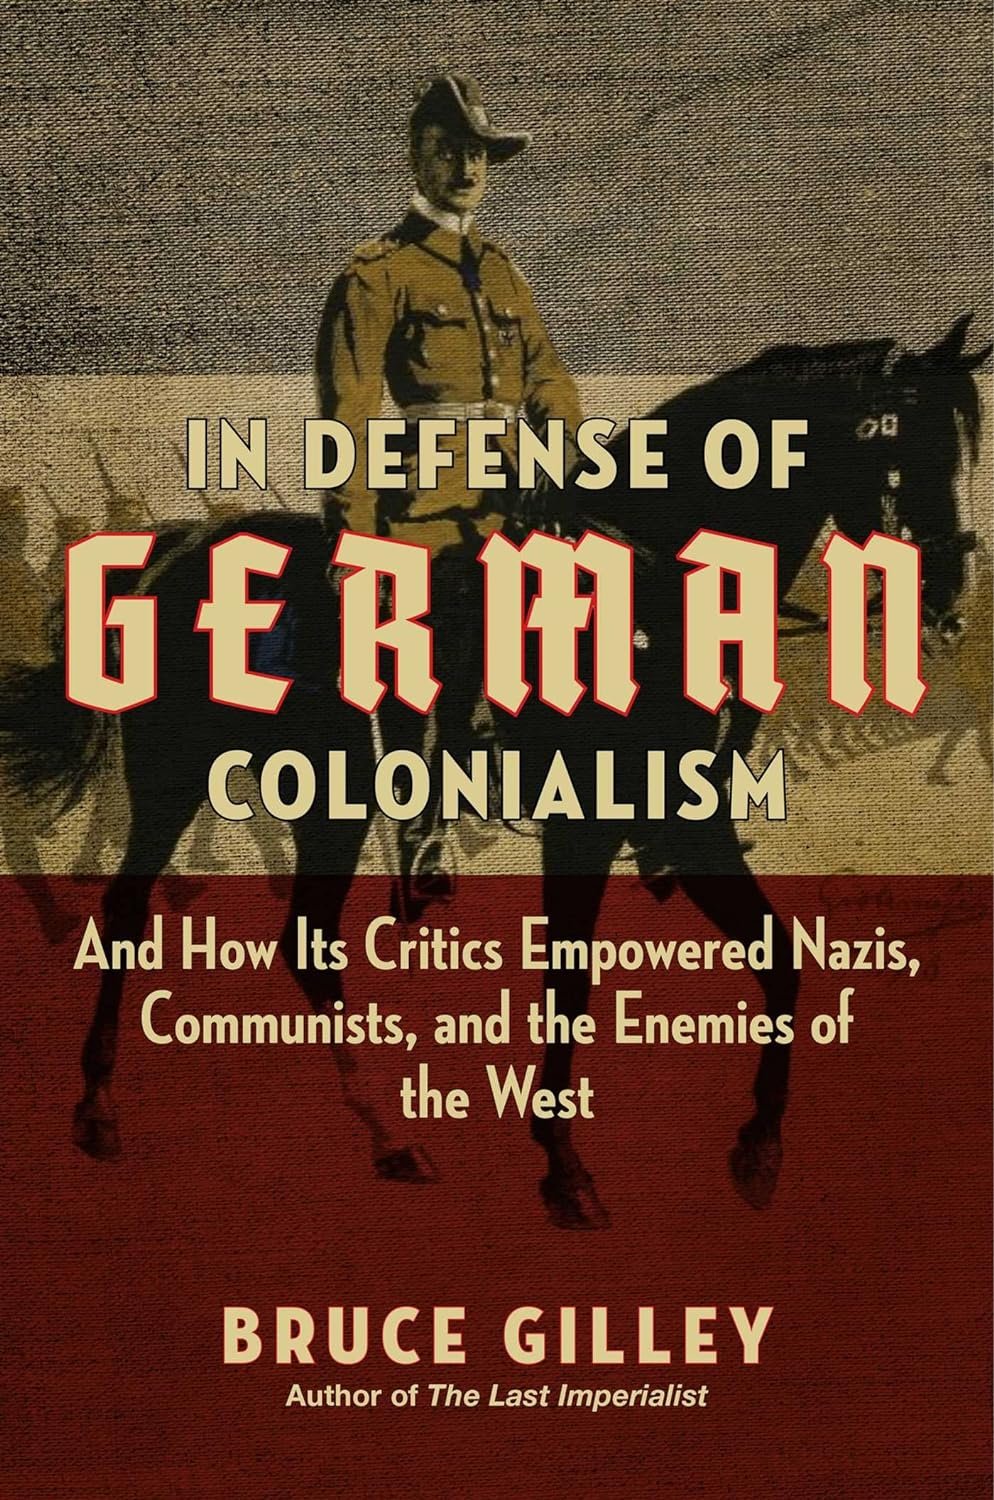 In Defense of German Colonialism: And How Its Critics Empowered Nazis, Communists, and the Enemies of the West